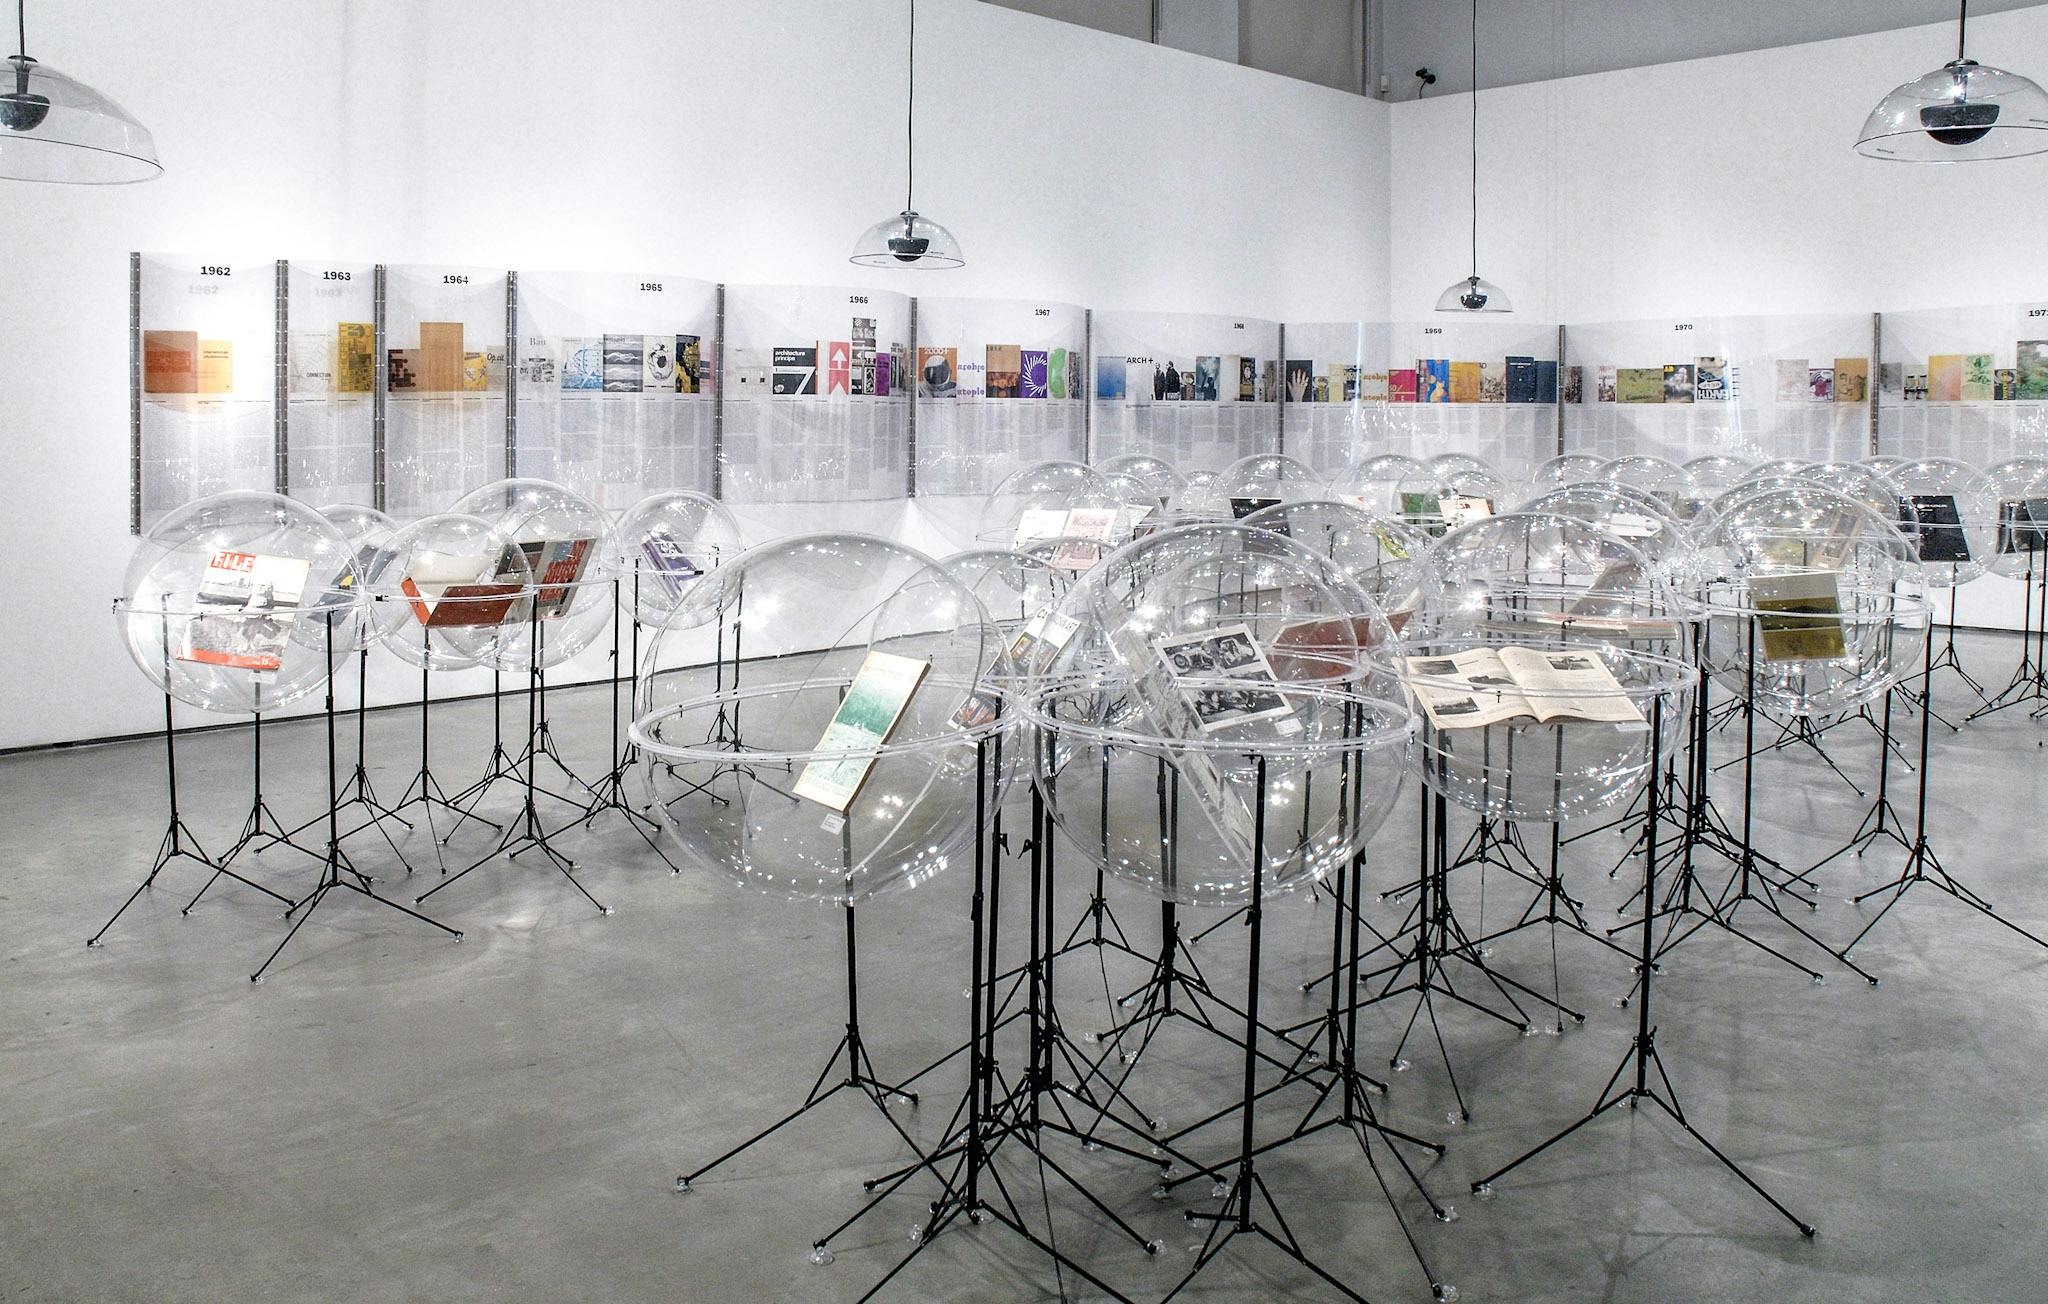 Many sculptures are installed in a gallery. They are magazines placed inside transparent rounder-shaped plastic cases. Those cases are supported by black metal legs similar to those of music stands. 